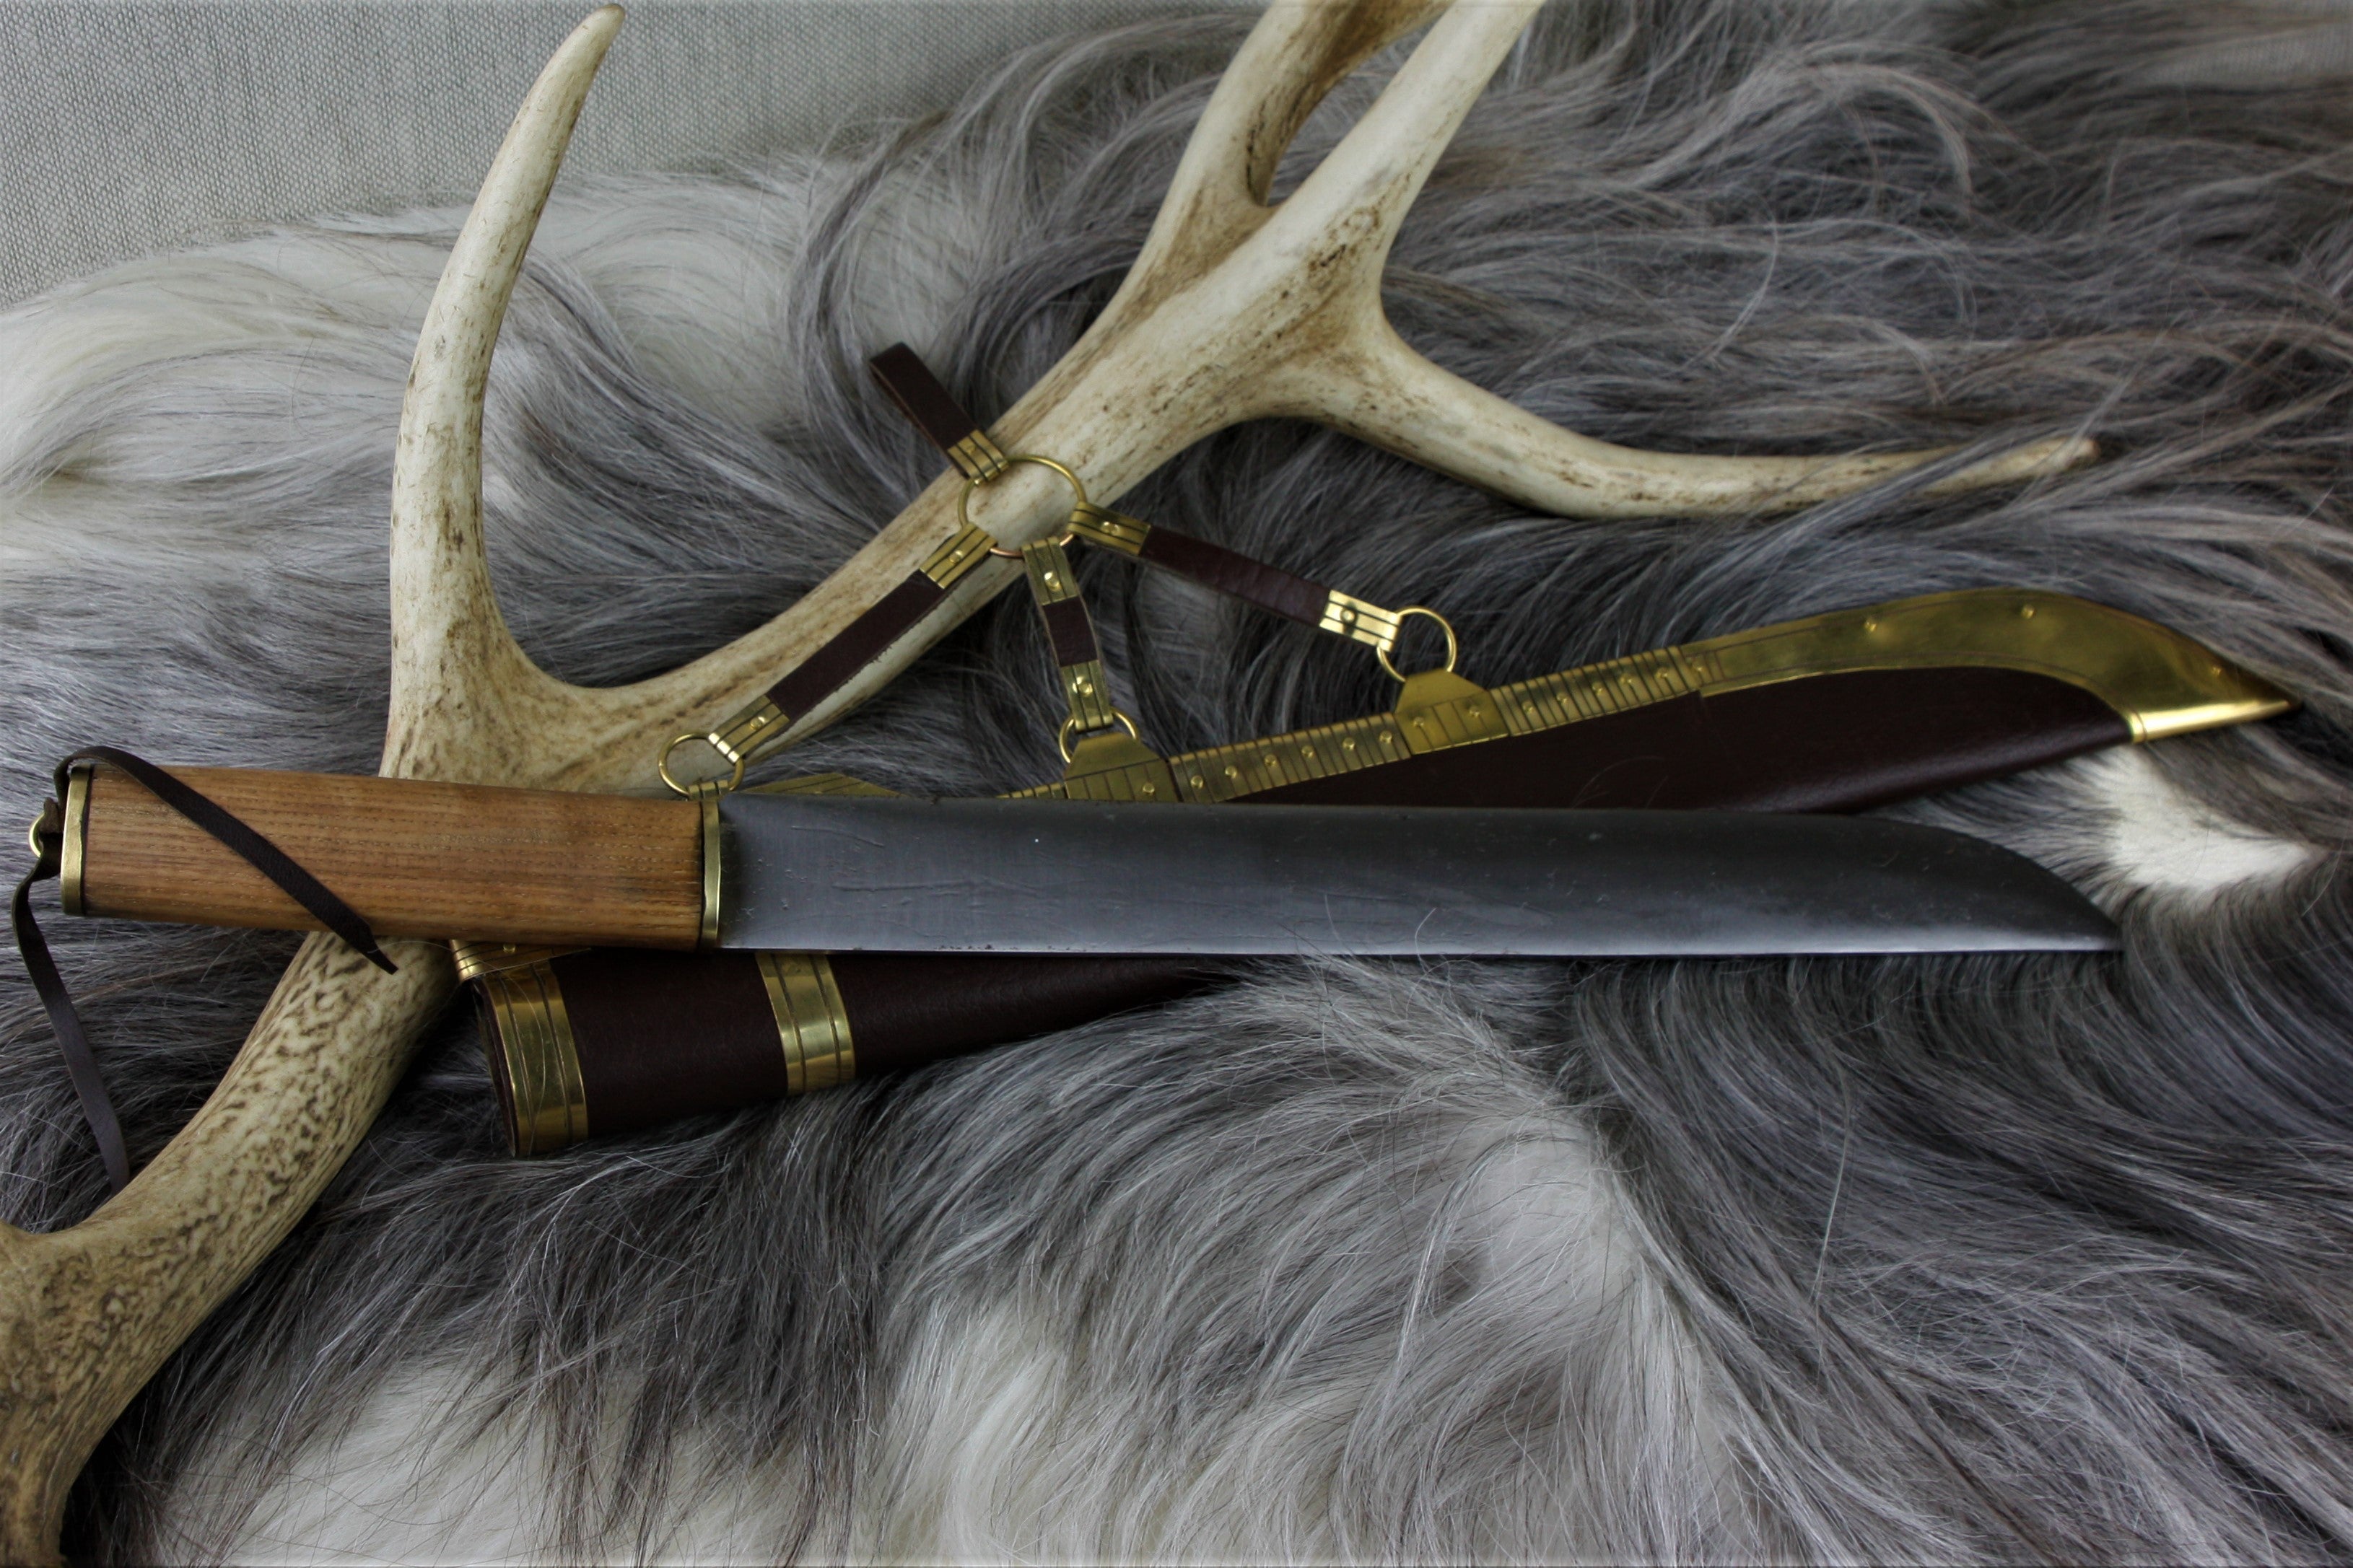 Reenactment Line seax with decorated scabbard